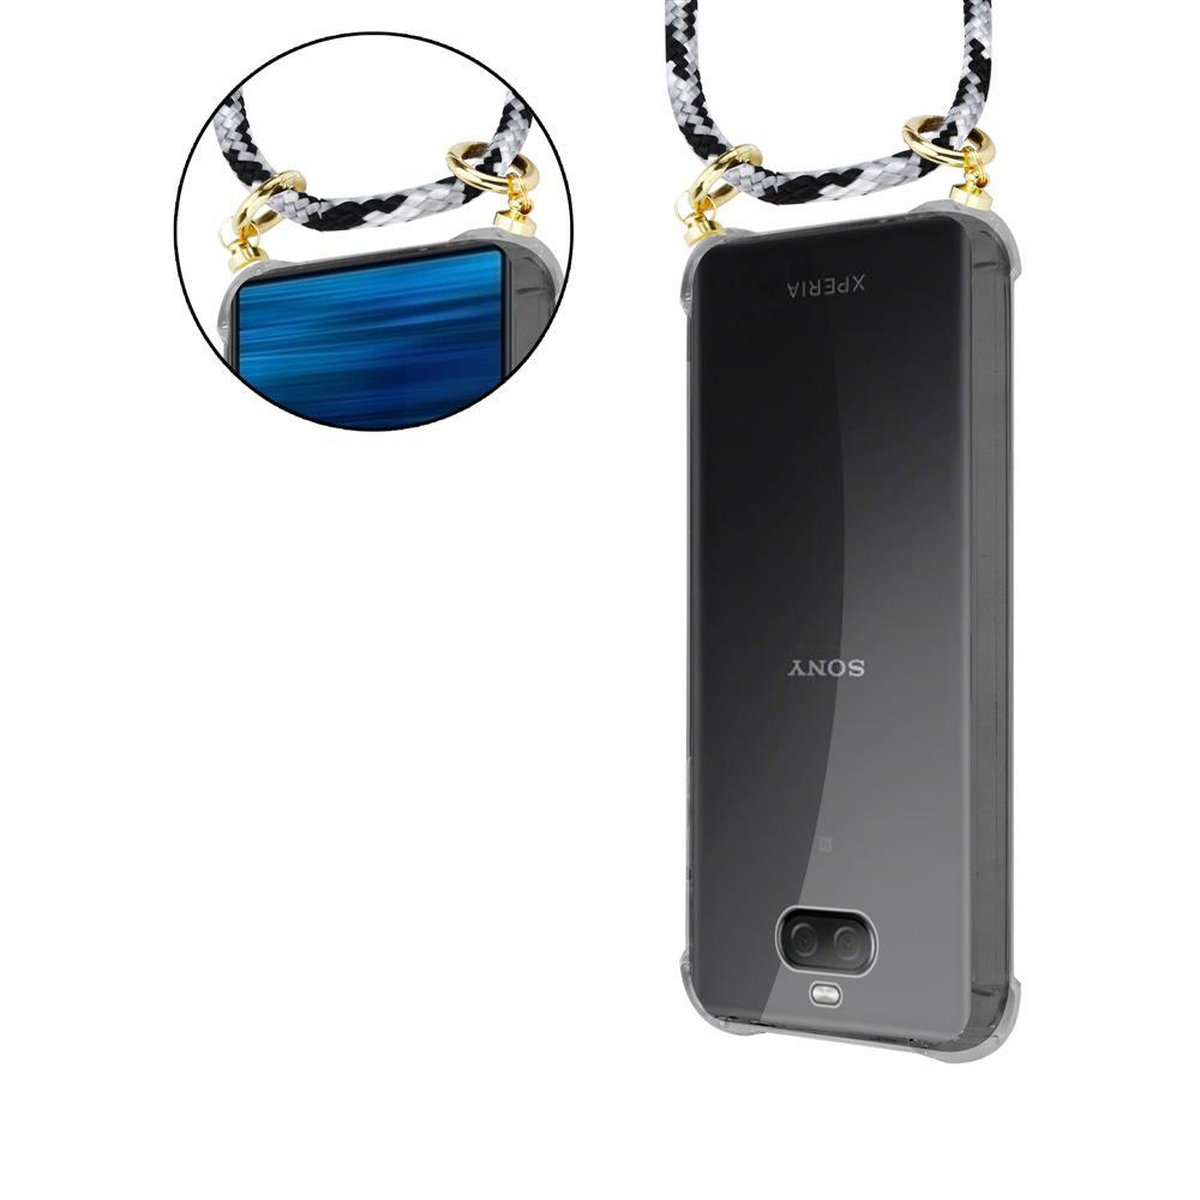 CADORABO Handy Kette mit Gold Sony, Hülle, Backcover, CAMOUFLAGE und SCHWARZ Band 10 Kordel abnehmbarer Ringen, Xperia PLUS